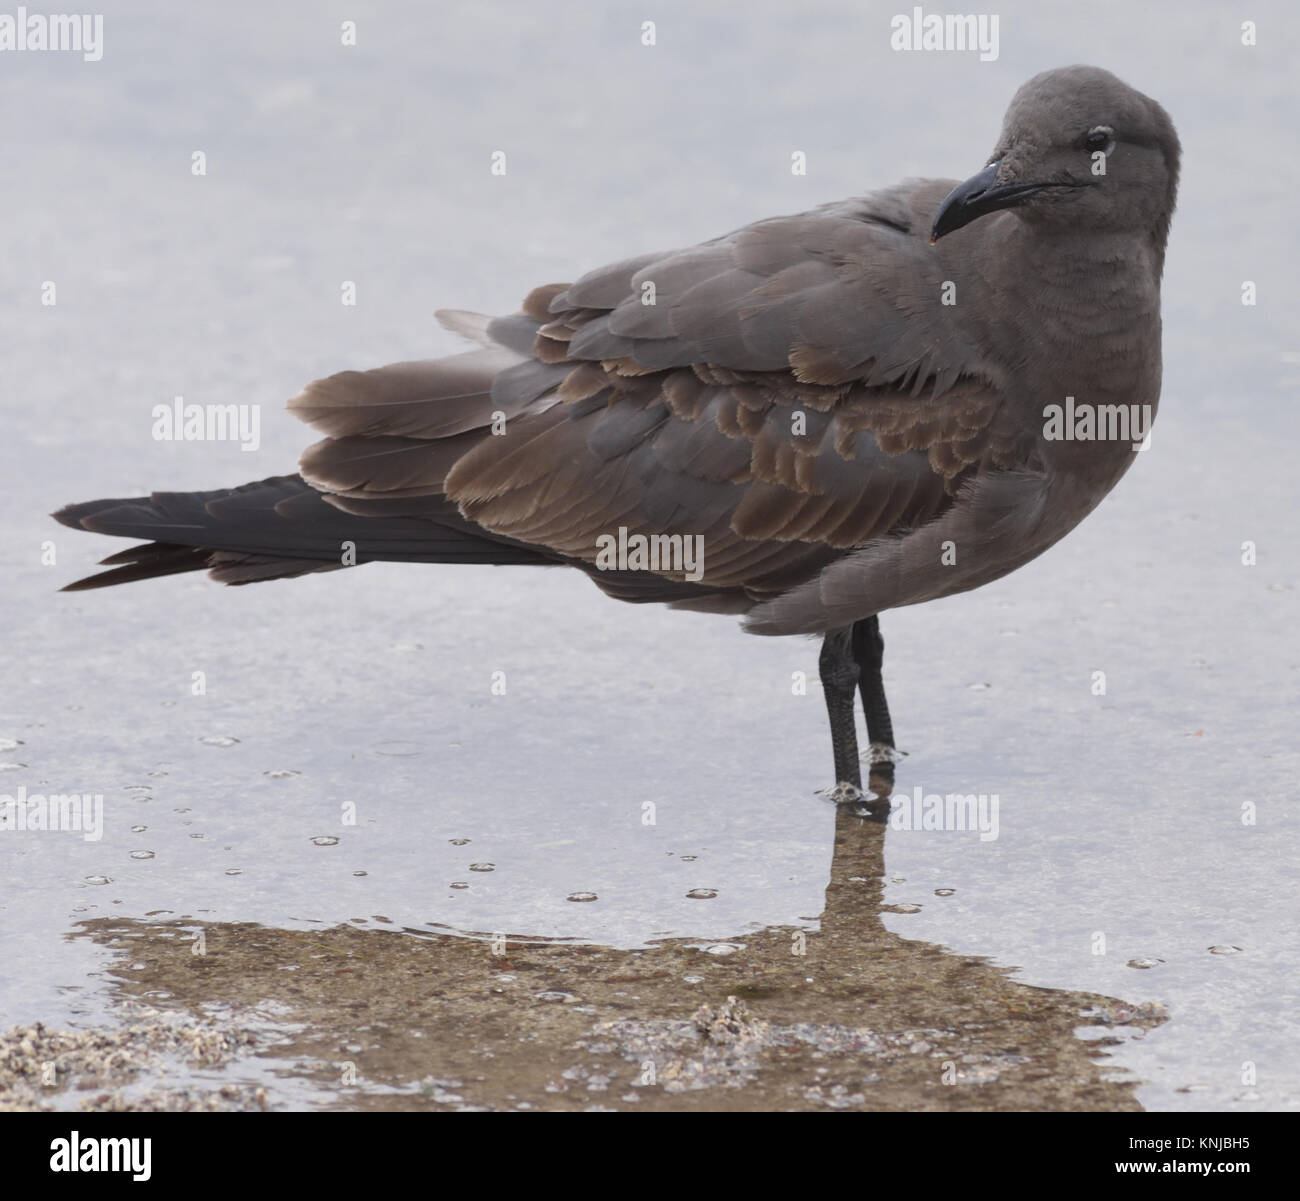 An immature lava gull or dusky gull (Leucophaeus fuliginosus) with immature brown plumage. The lava gull, said to be the rarest gull in the world, is Stock Photo